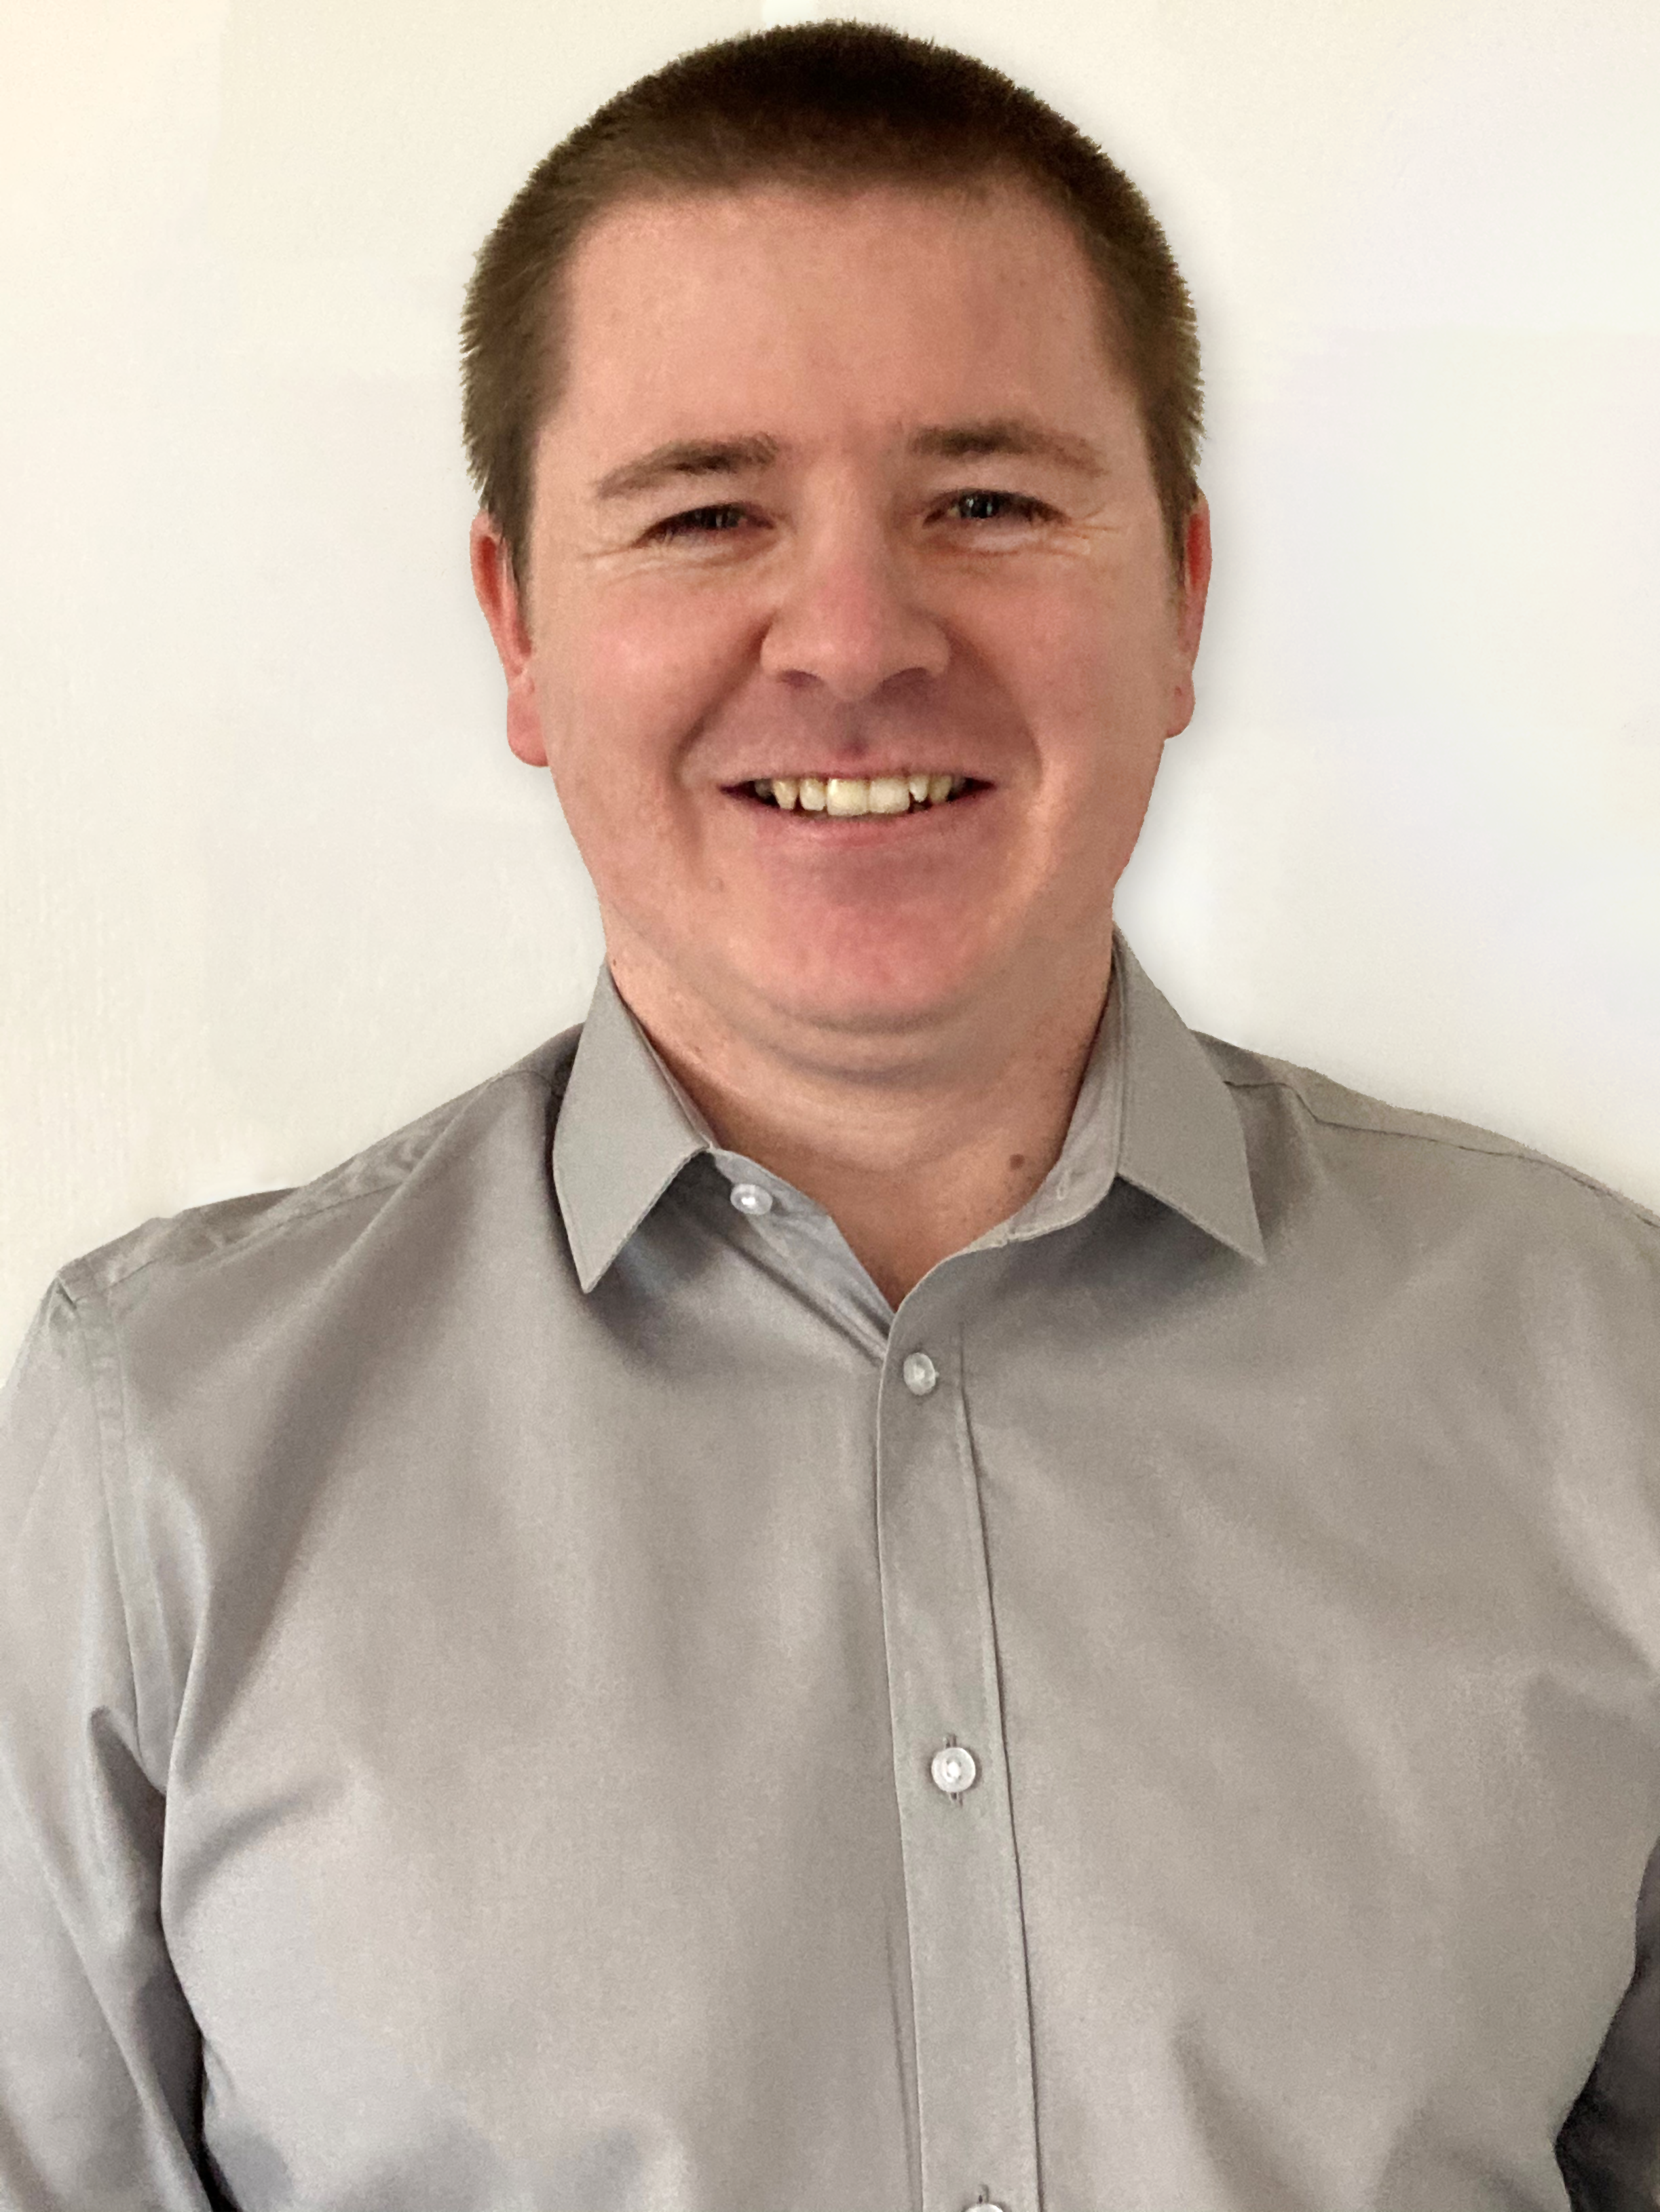 Energy Partner Professional Energy Purchasing welcomes Dan Wilson to its sales and account management team.